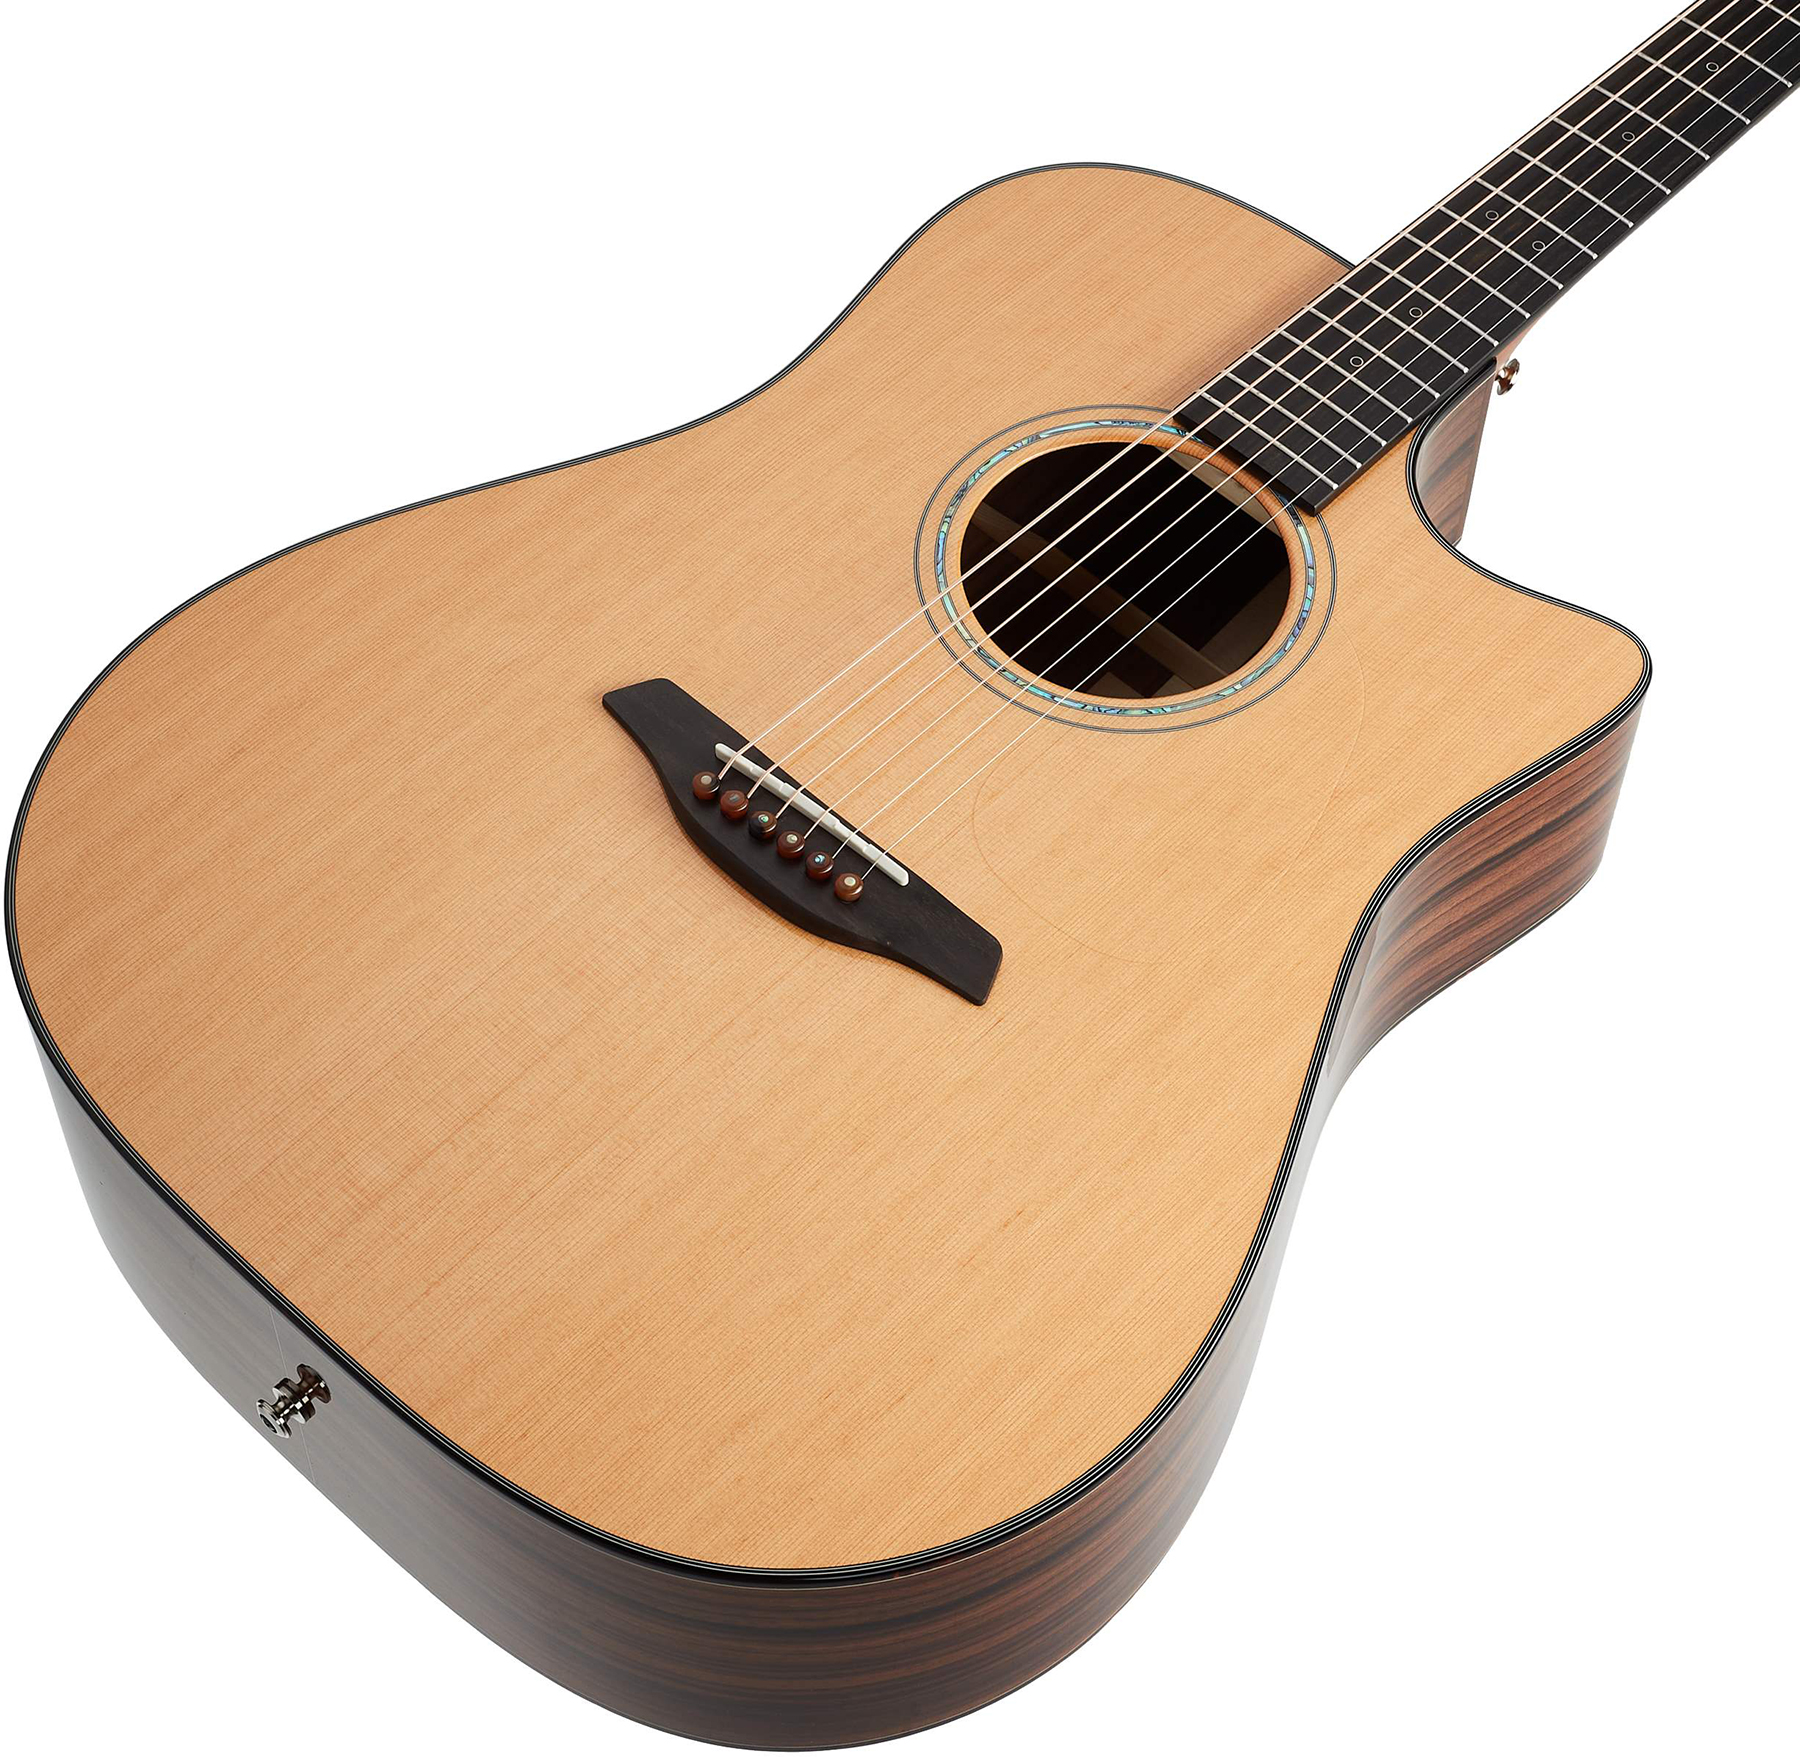 Furch Dc-cr Lrb1 Yellow Dreadnought Cw Cedre Palissandre Eb - Natural Full-pore - Guitarra electro acustica - Variation 2